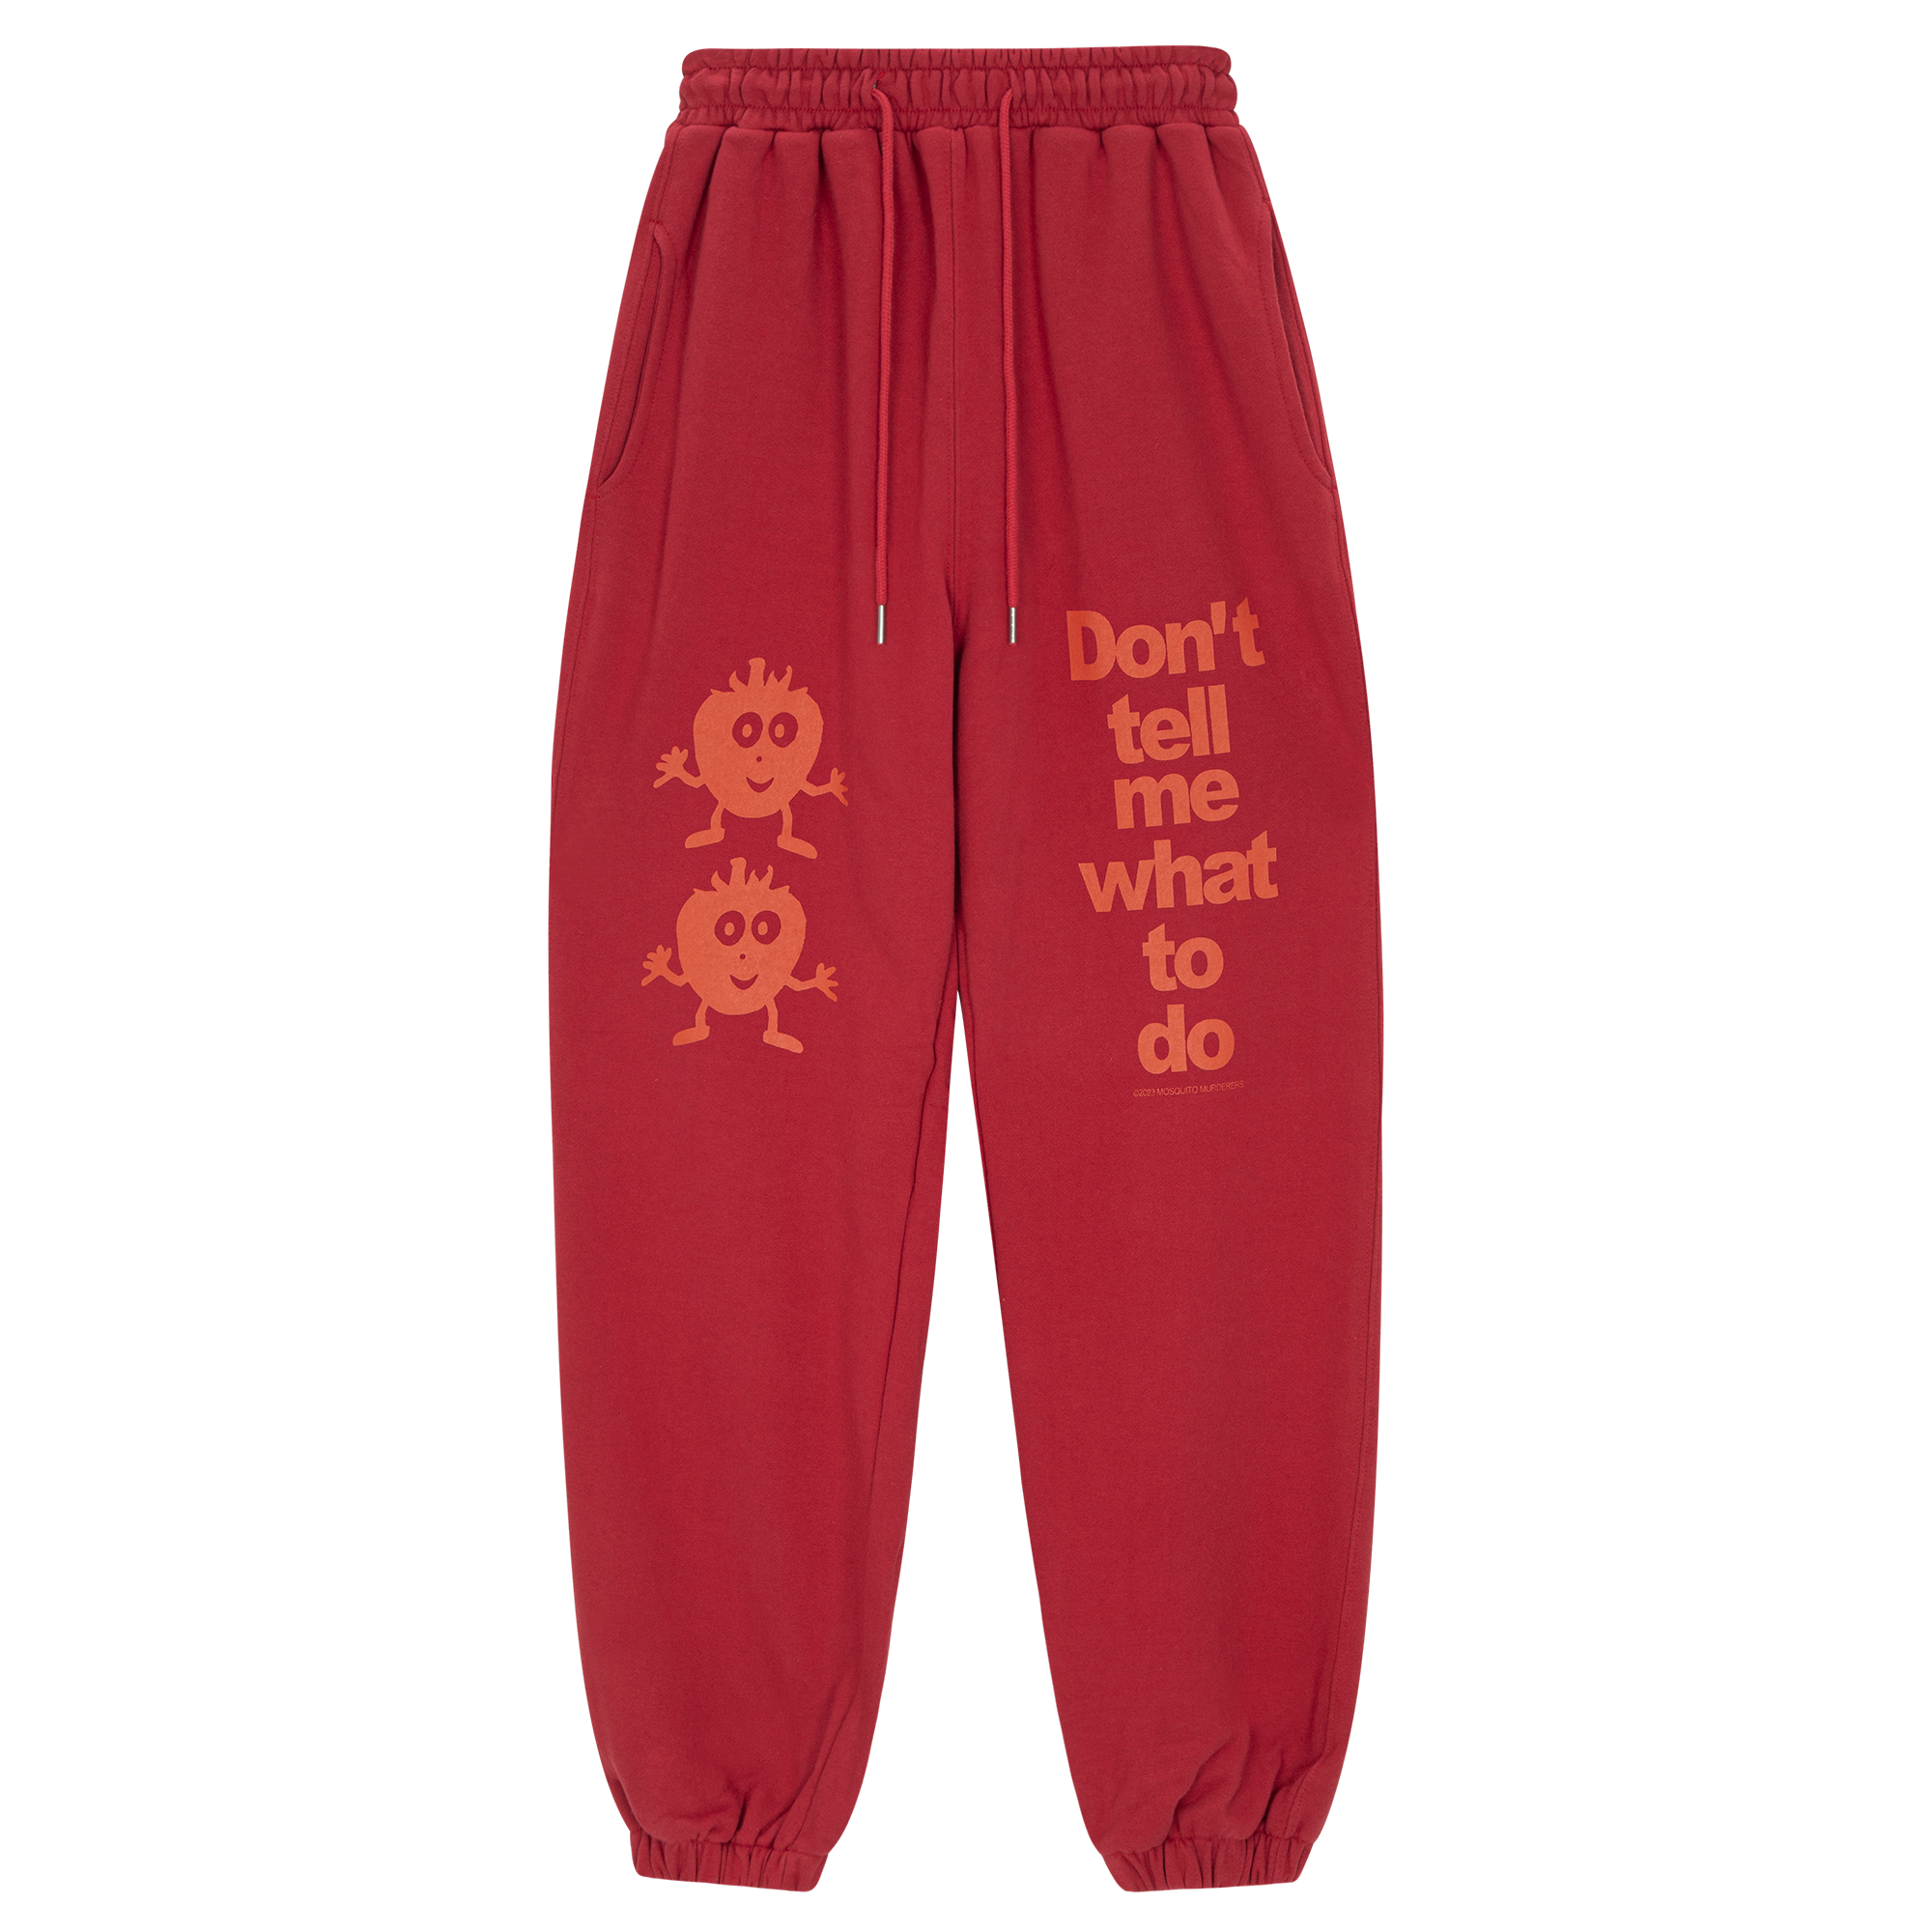 Don’t tell me what to do SWEATPANTS (Red)